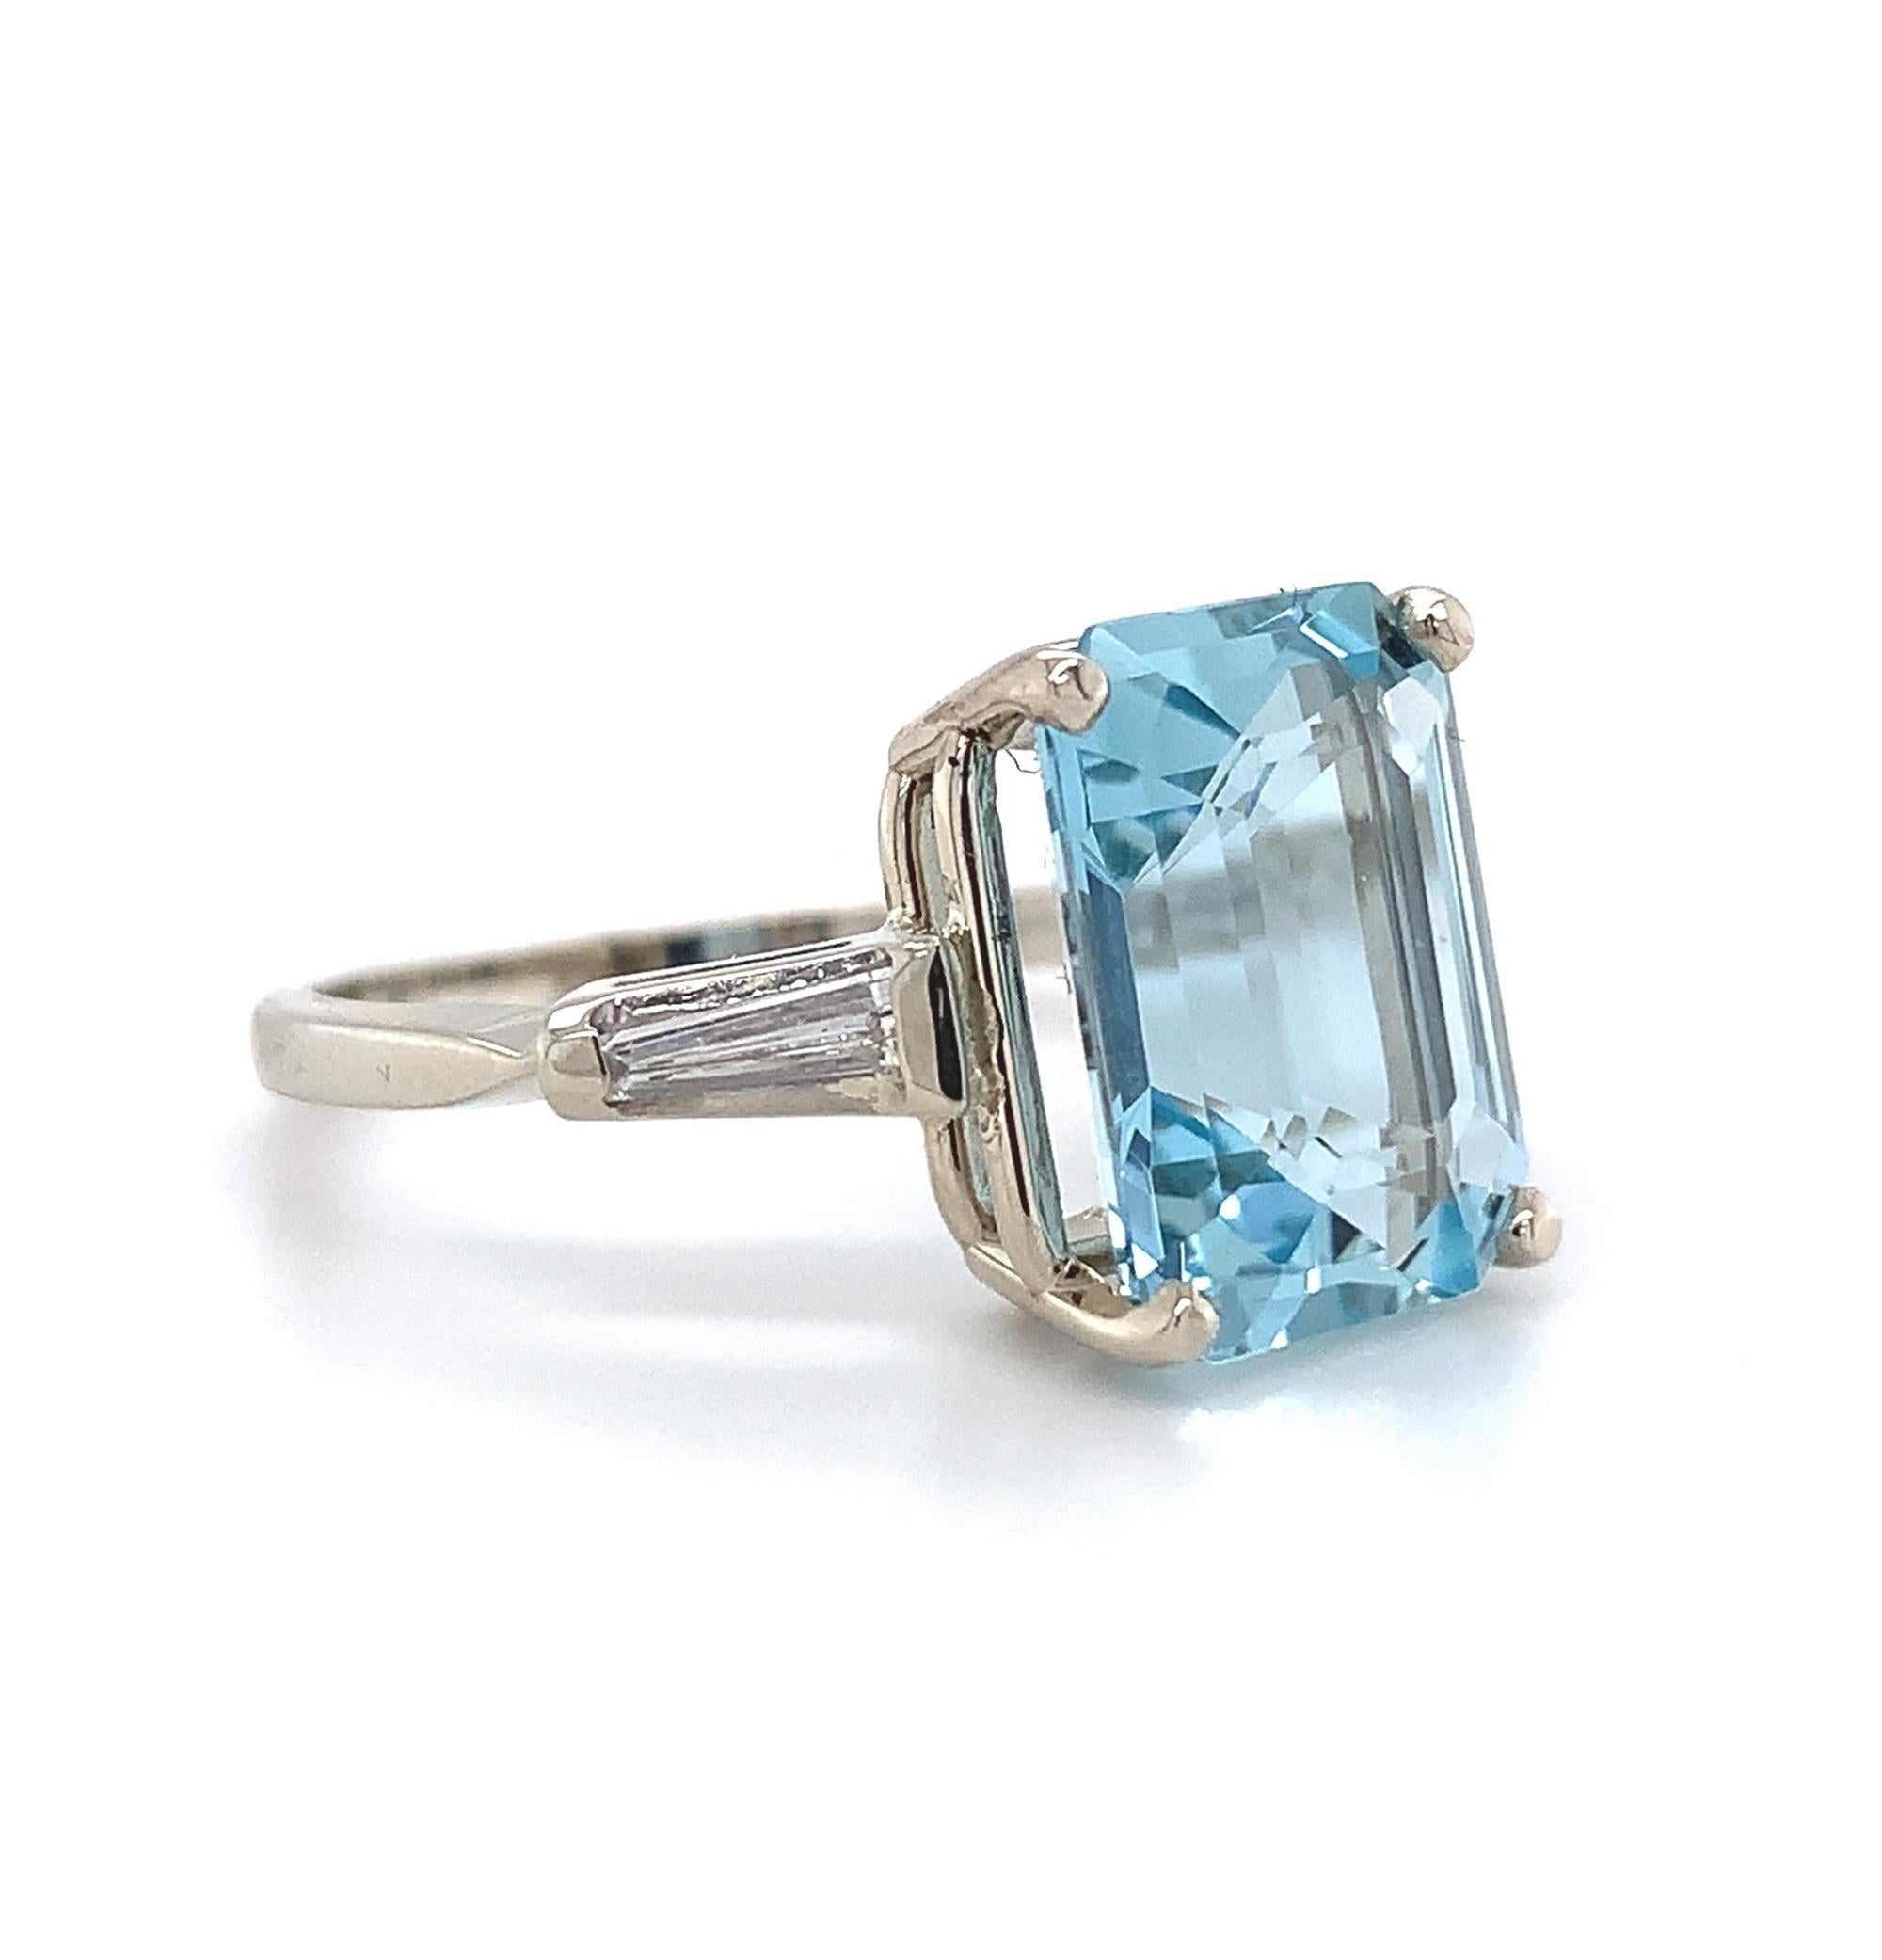 14K white gold aquamarine and diamond ring featuring an emerald cut aquamarine weighing 4.51 carats. The aqua has sky blue color and fine clarity. It measures about 12 mm x 9mm. The aqua is accented by 2 long tapered baguette diamonds weighing about